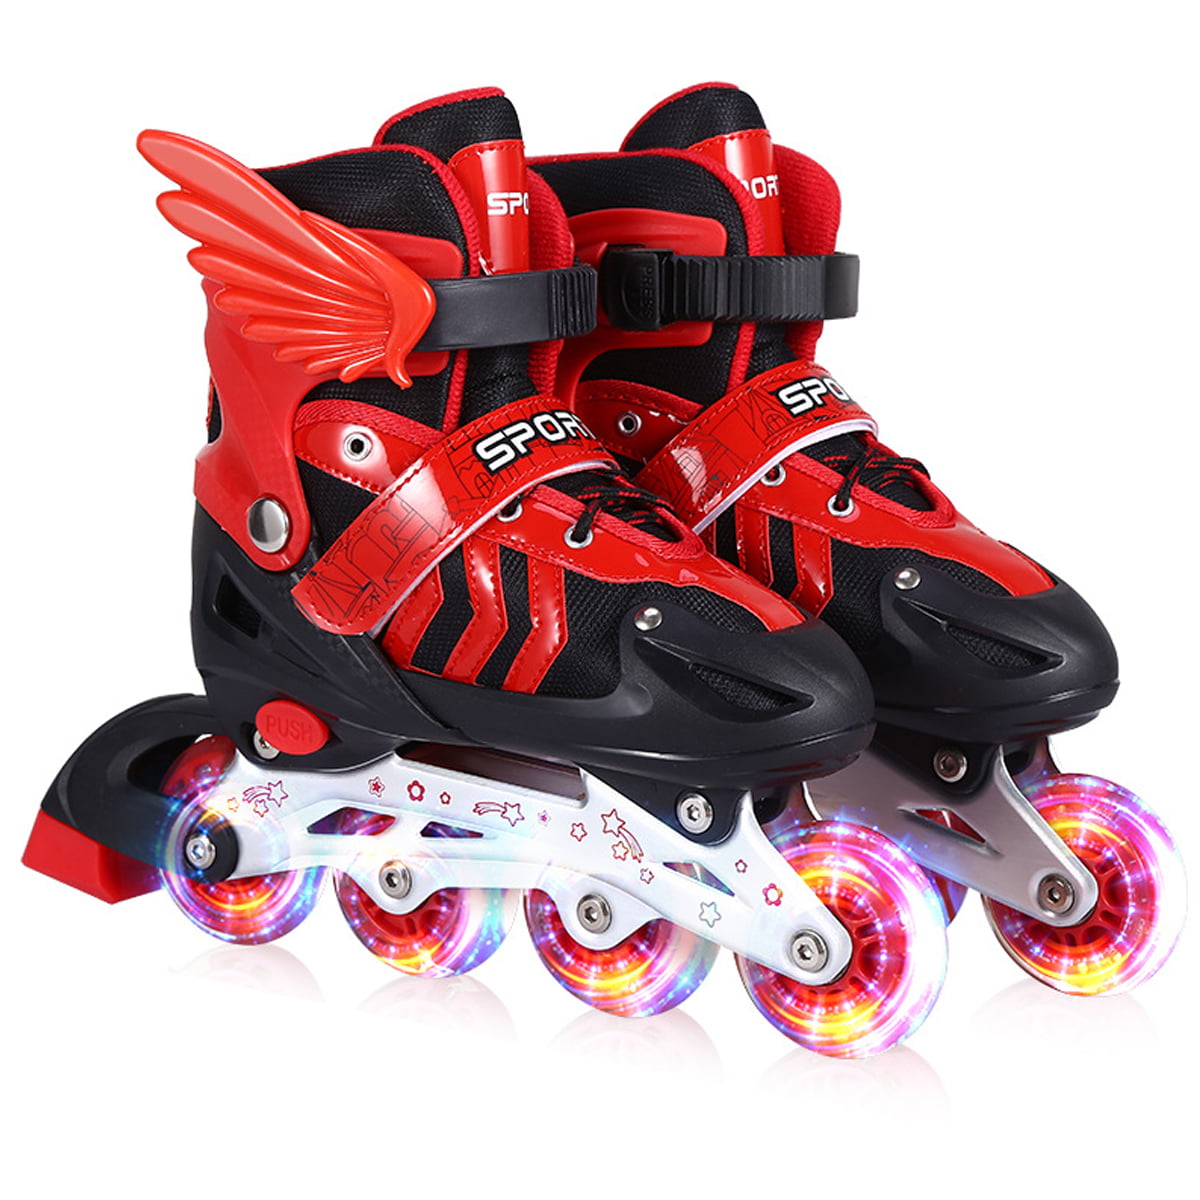 AUXSOUL Inline Skates Adjustable Illuminating Roller Skates Outdoor Indoor with Light Up Wheels for Kids Teenagers Adult Girls Boys and Beginners